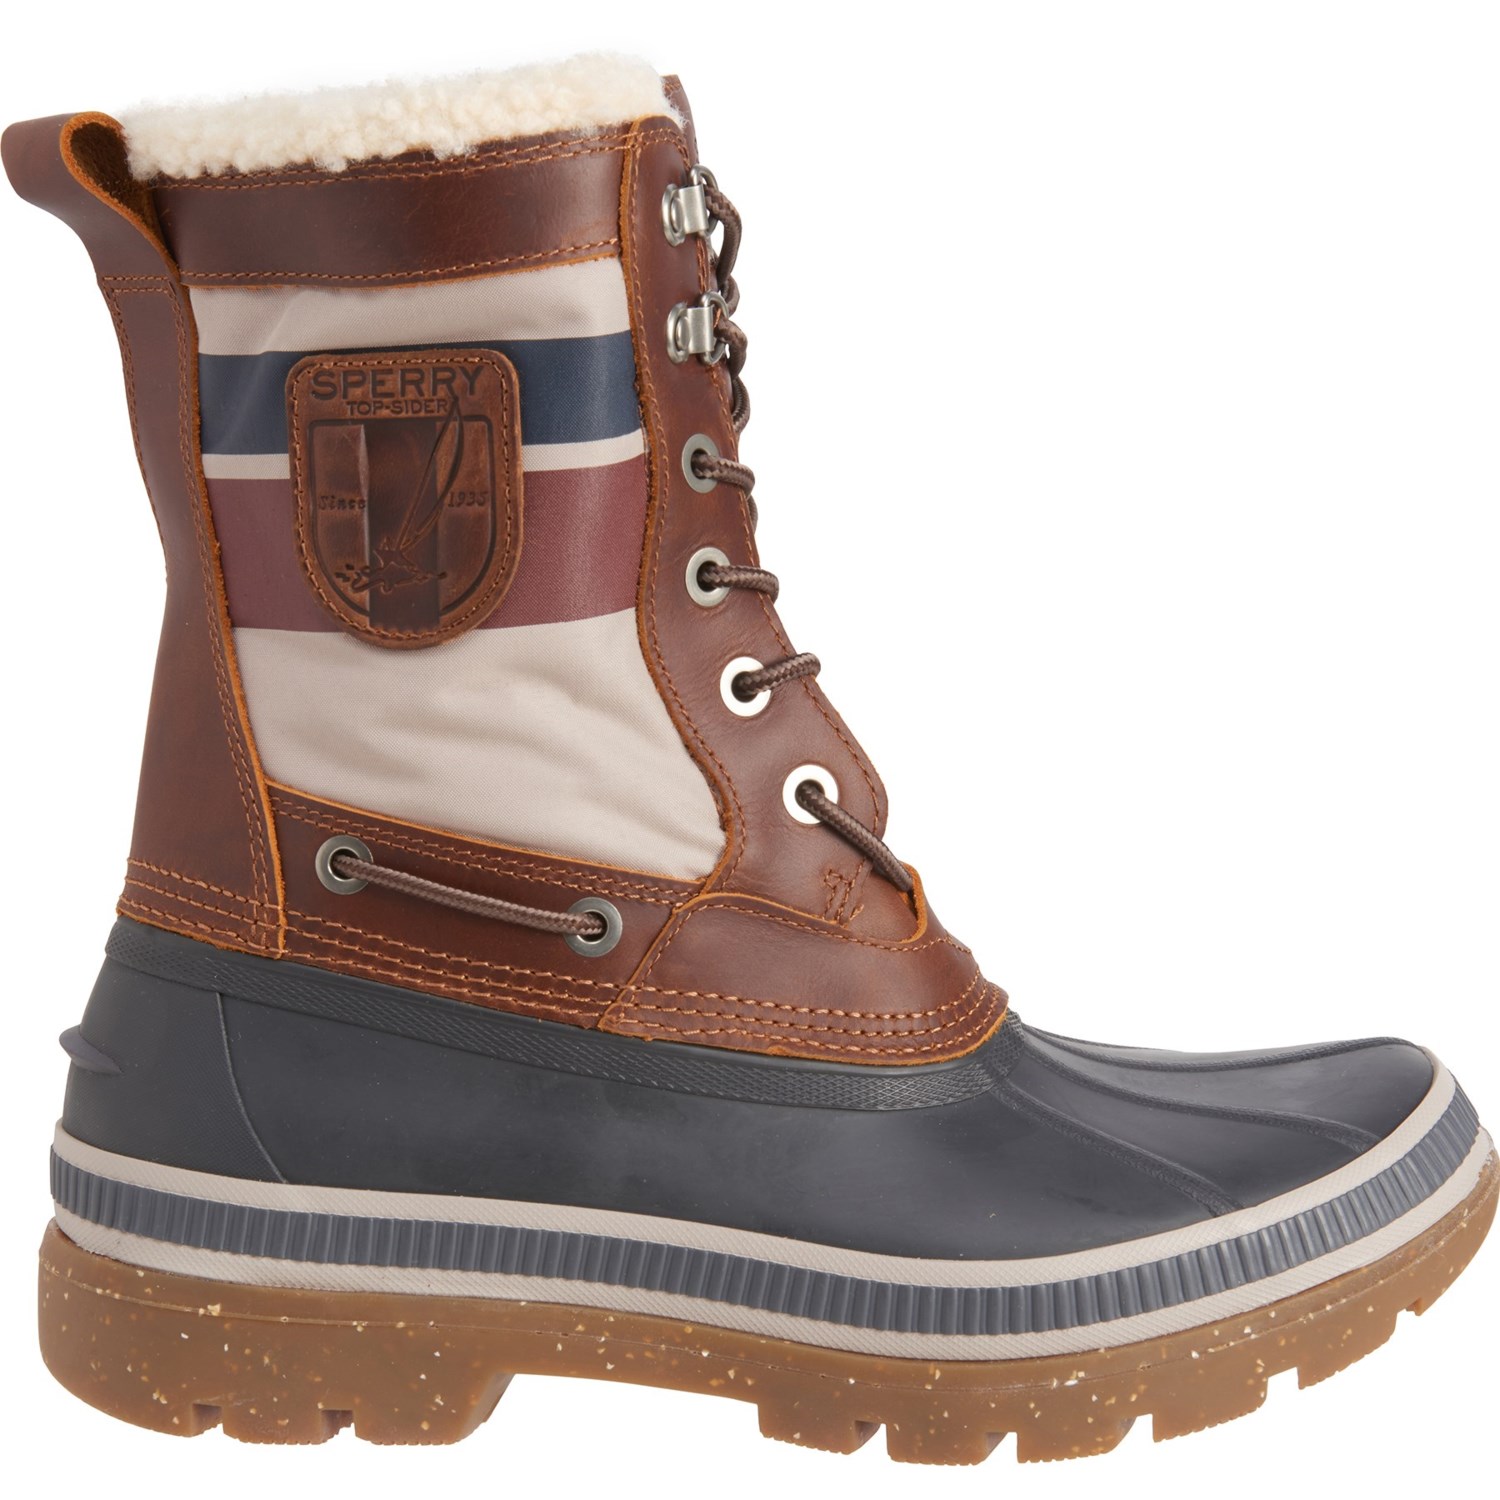 thinsulate sperry boots